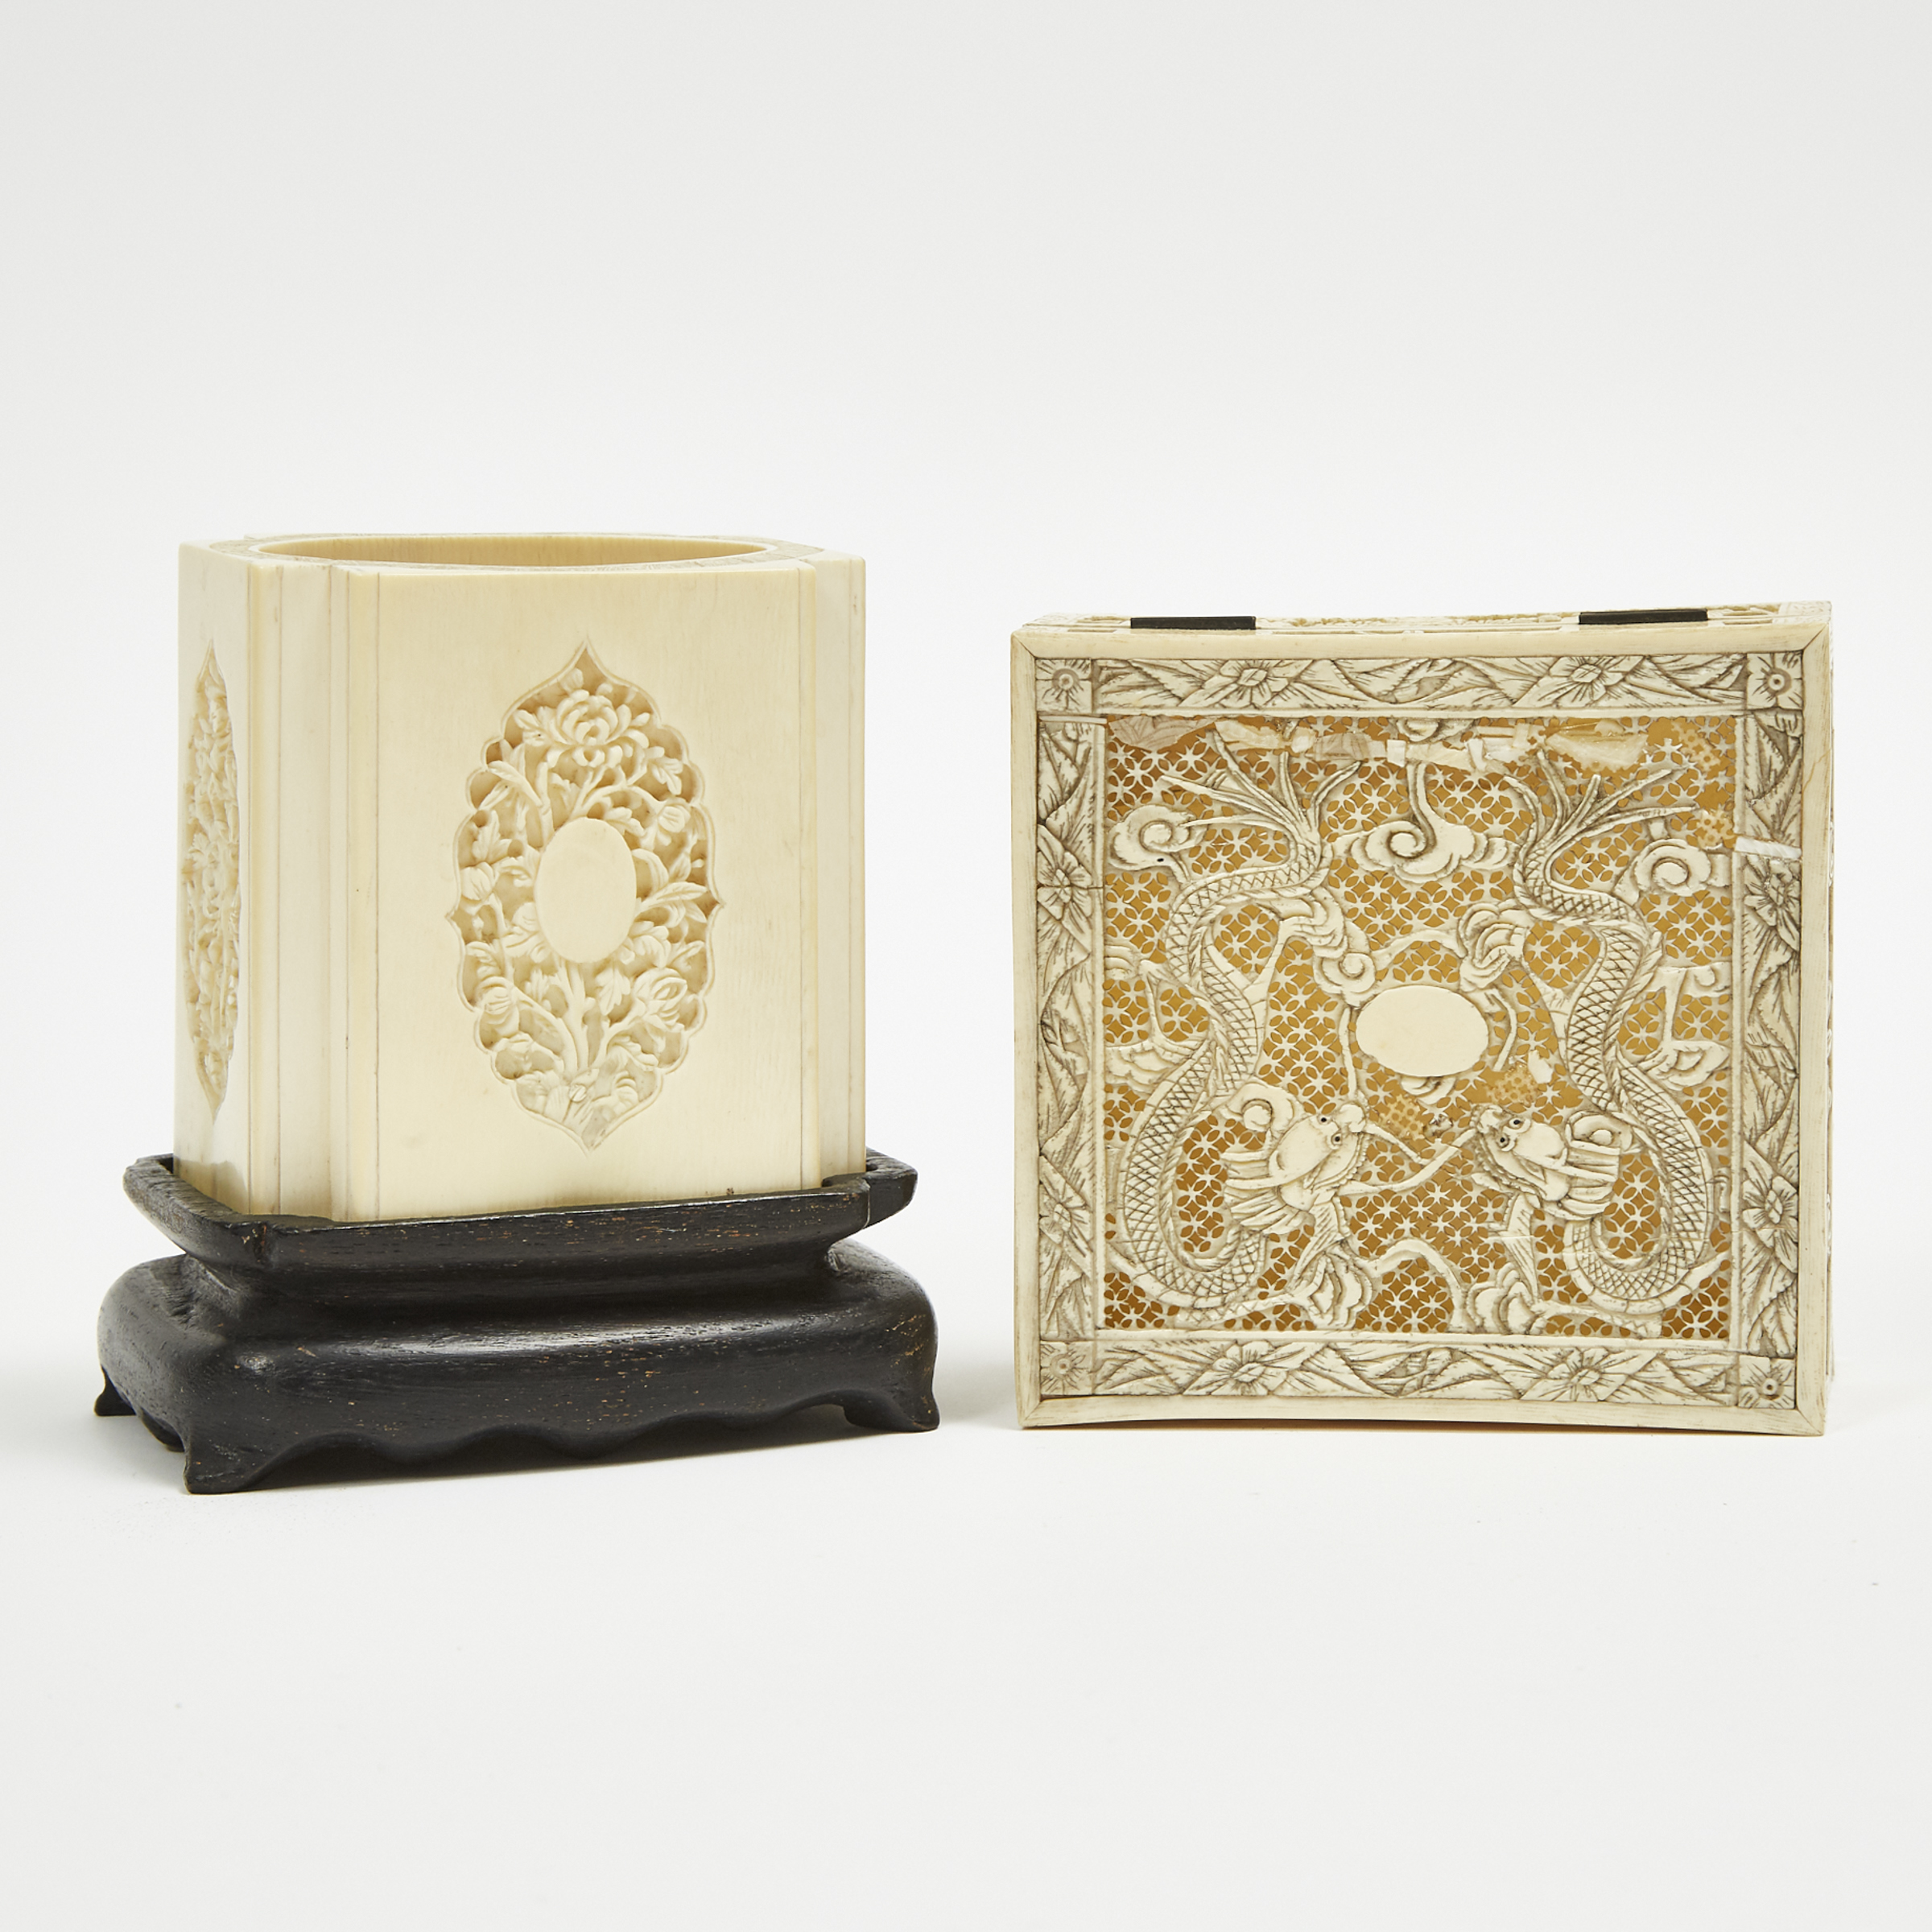 A Rectangular Ivory Carved Floral Paneled Brushpot with Stand, together with a Reticulated Ivory Jewellery Box